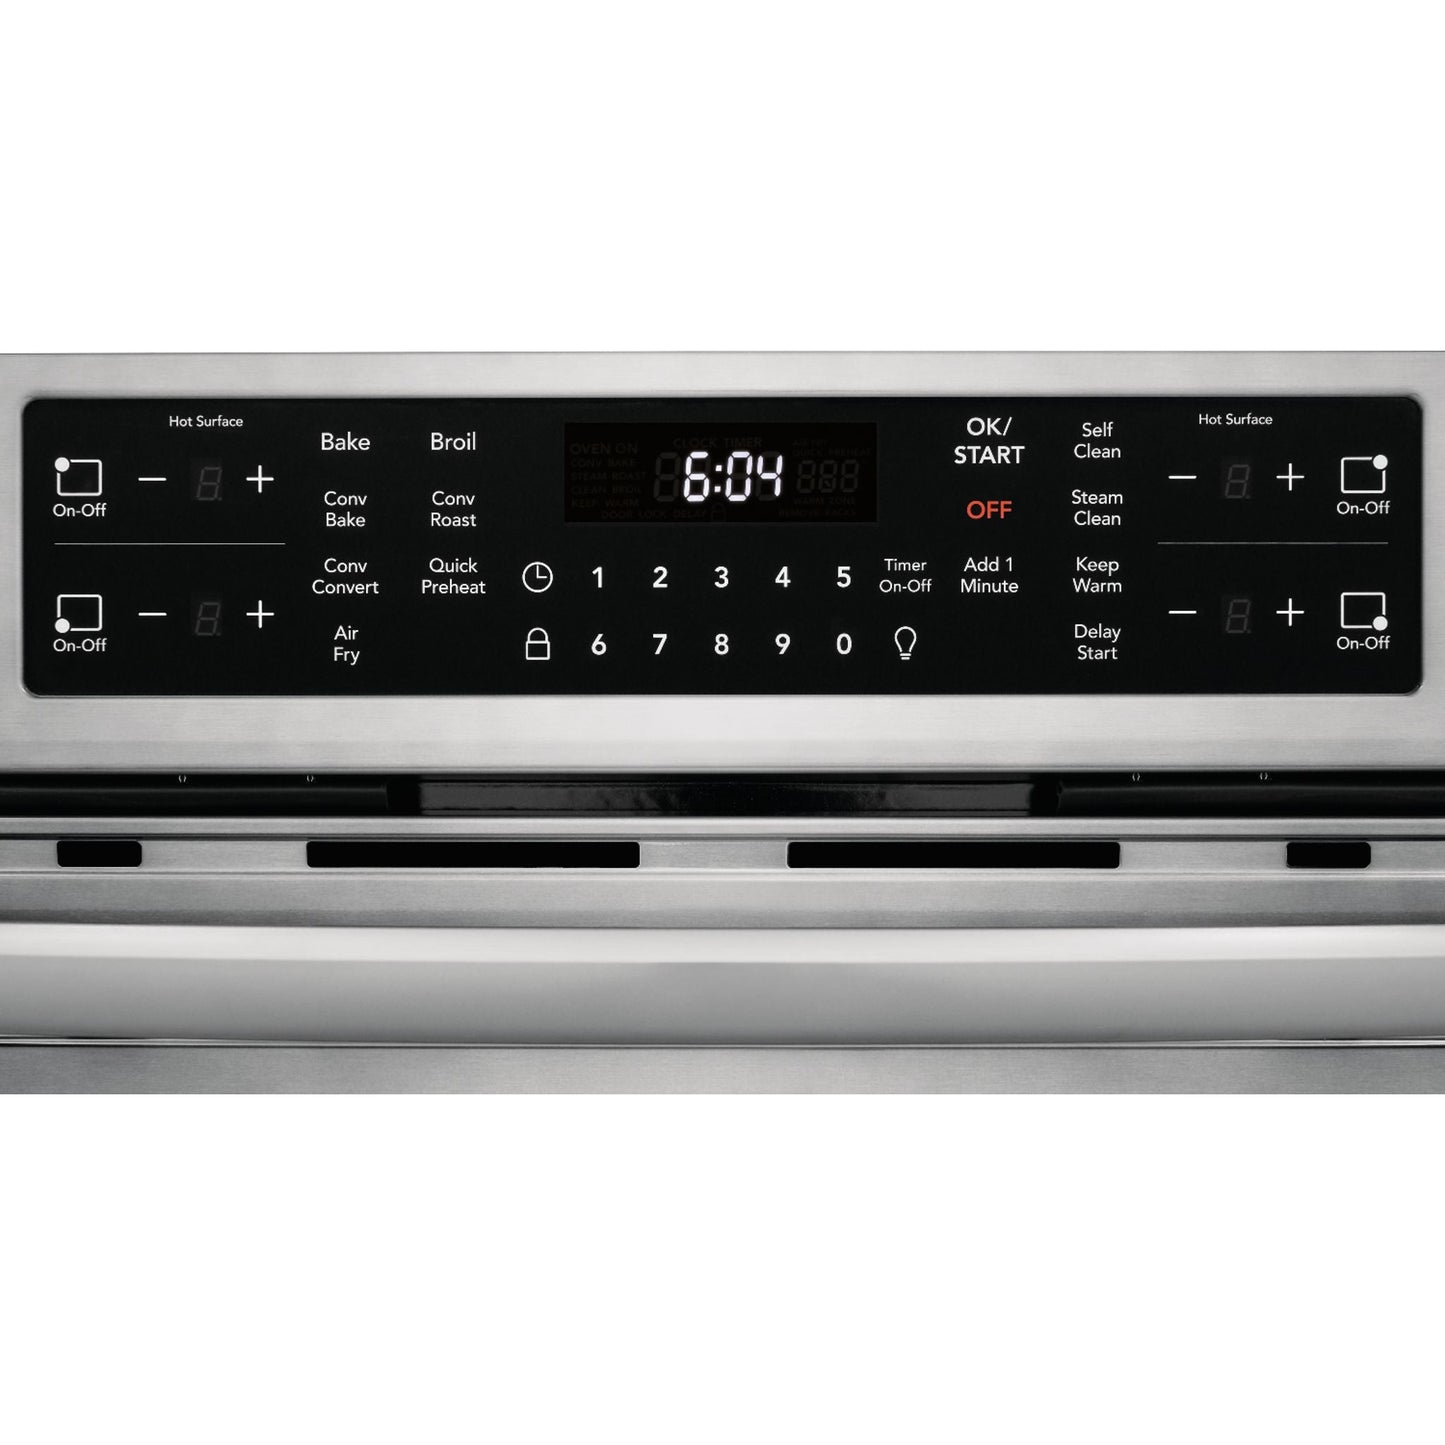 Frigidaire Gallery Front Control Range (CGIH3047VF) - Stainless Steel